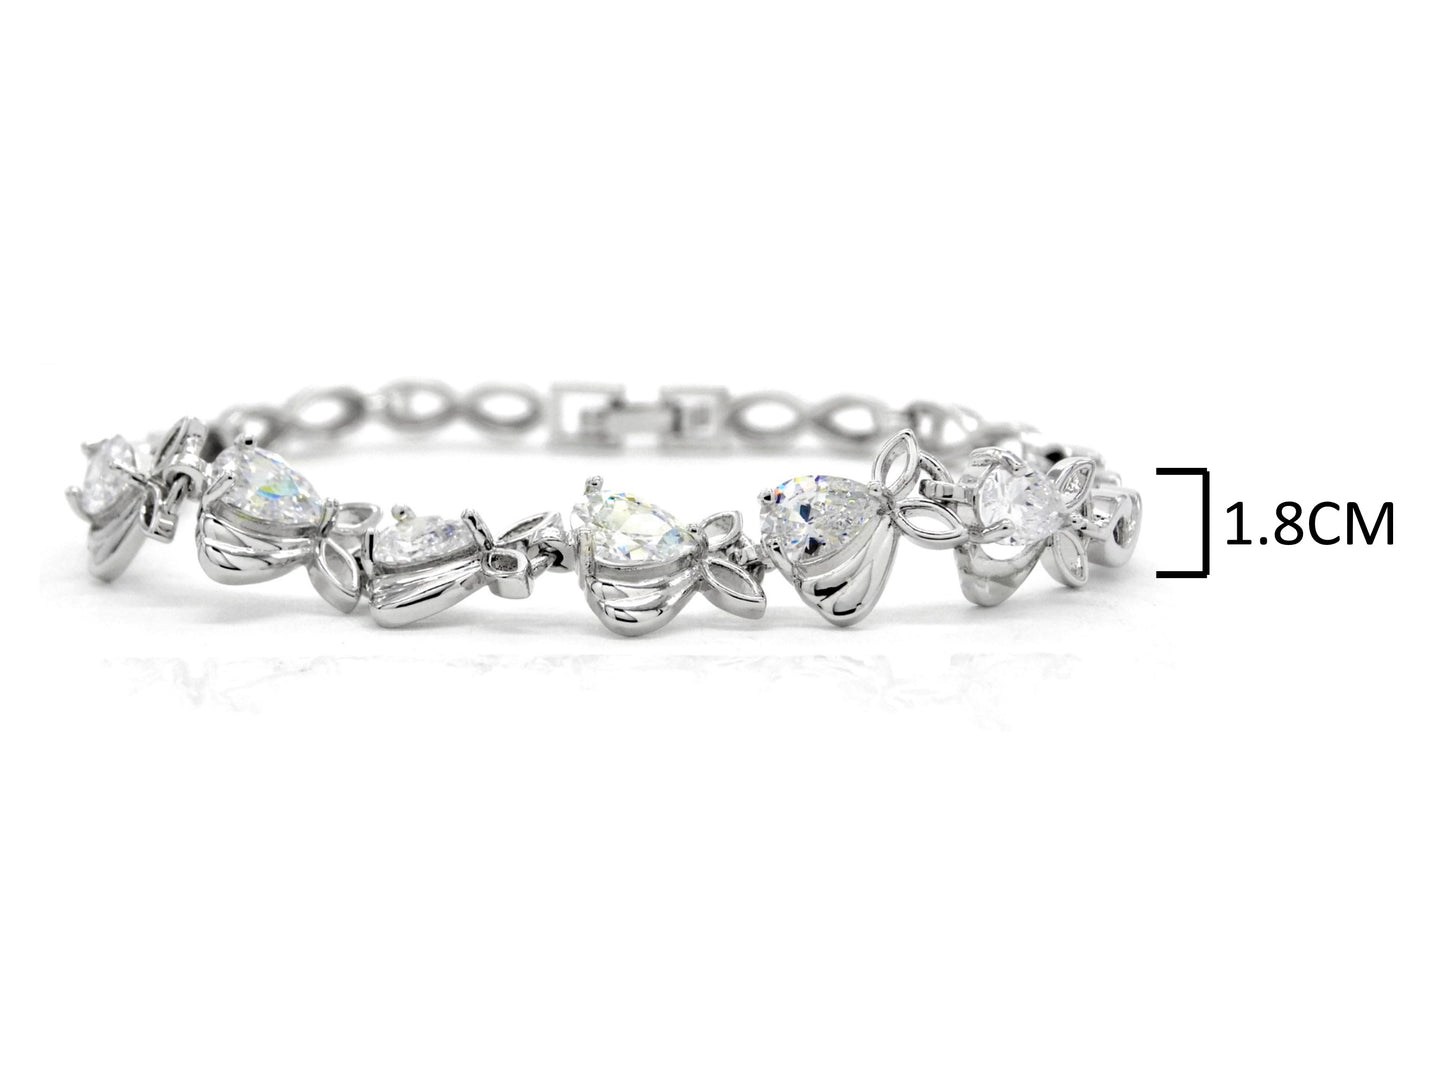 Sparkly white silver plated bracelet MEASUREMENT